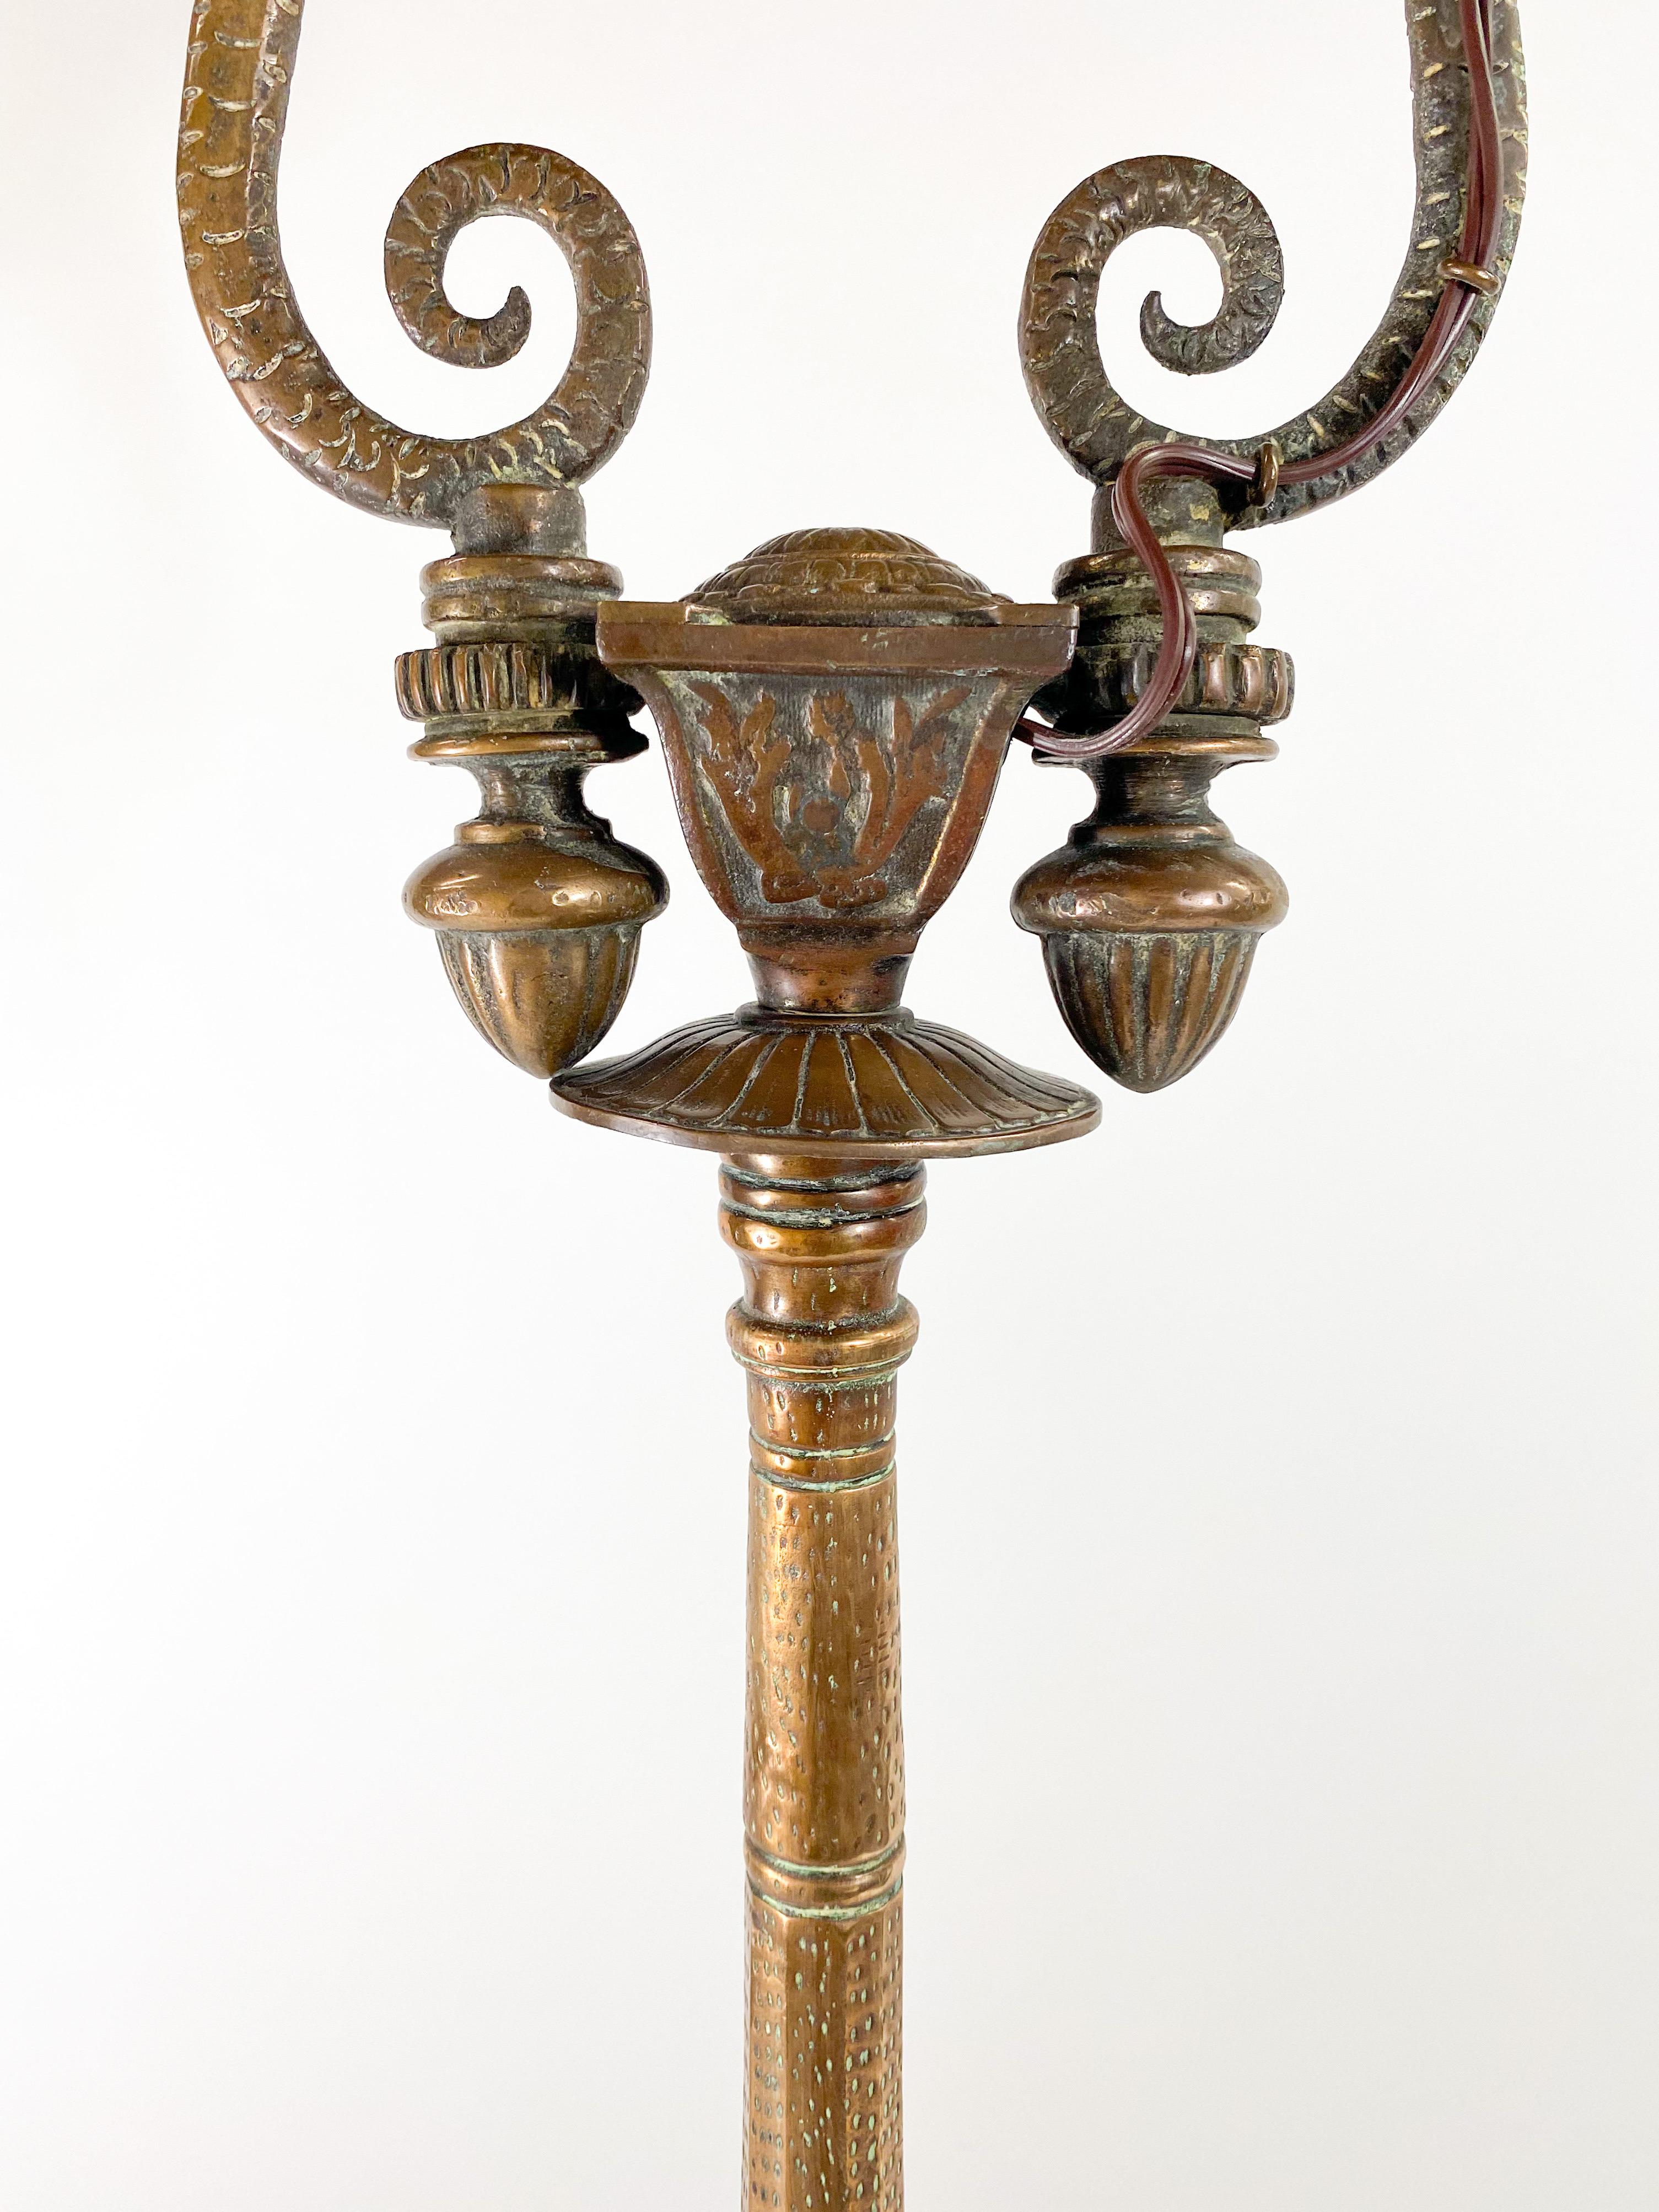 19th Century French Rococo Revival Style Bronze Patinated Dragons Floor Lamp For Sale 4